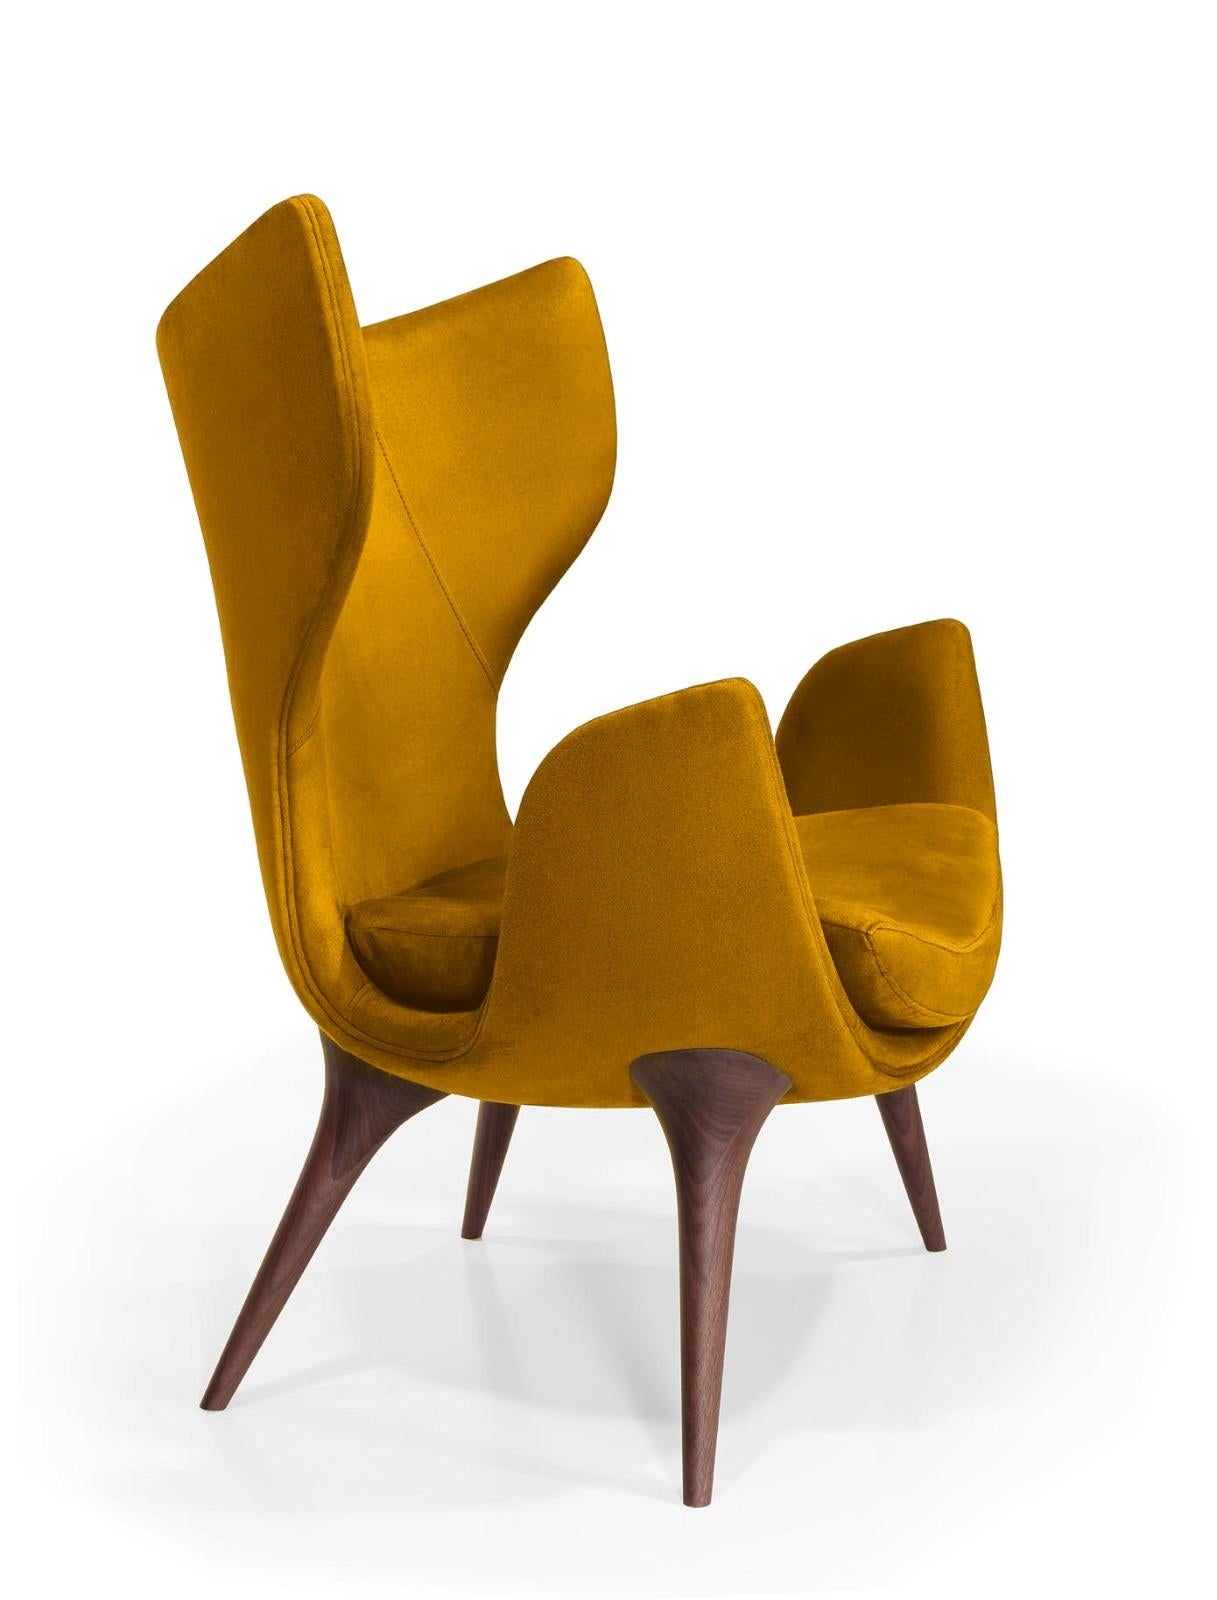 A true statement of luxury
Combining the finest and ancient craftsmanship with luxurious levels of design, quality, and comfort. 

Korcula Armchair, Modern Collection, Walnut Wood, Suede Fabric - Traditional Handcrafted in Portugal 

It is made